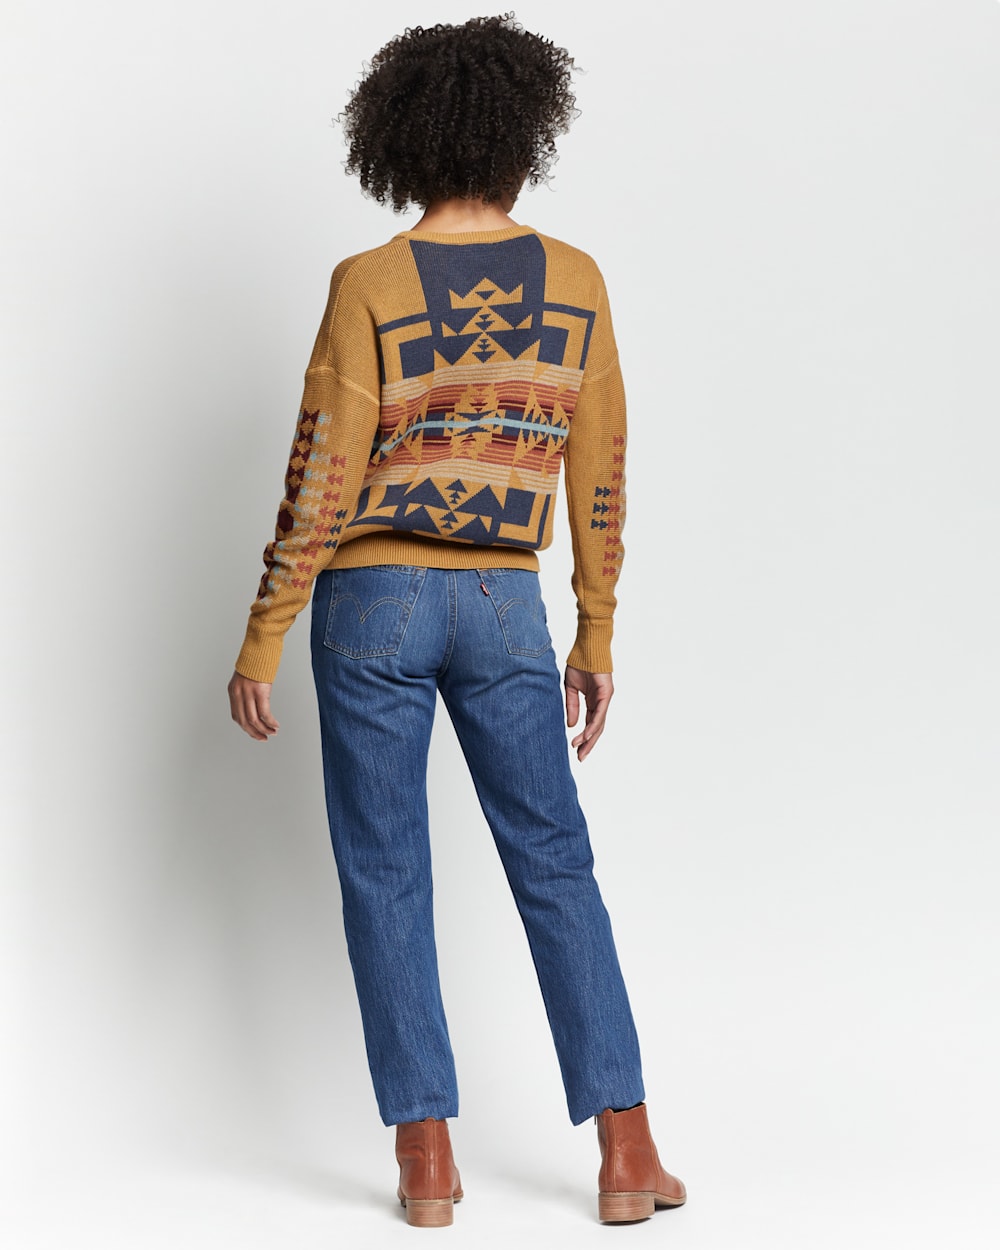 ALTERNATE VIEW OF WOMEN'S GRAPHIC COTTON SWEATER IN BRONZE CHIEF JOSEPH image number 2